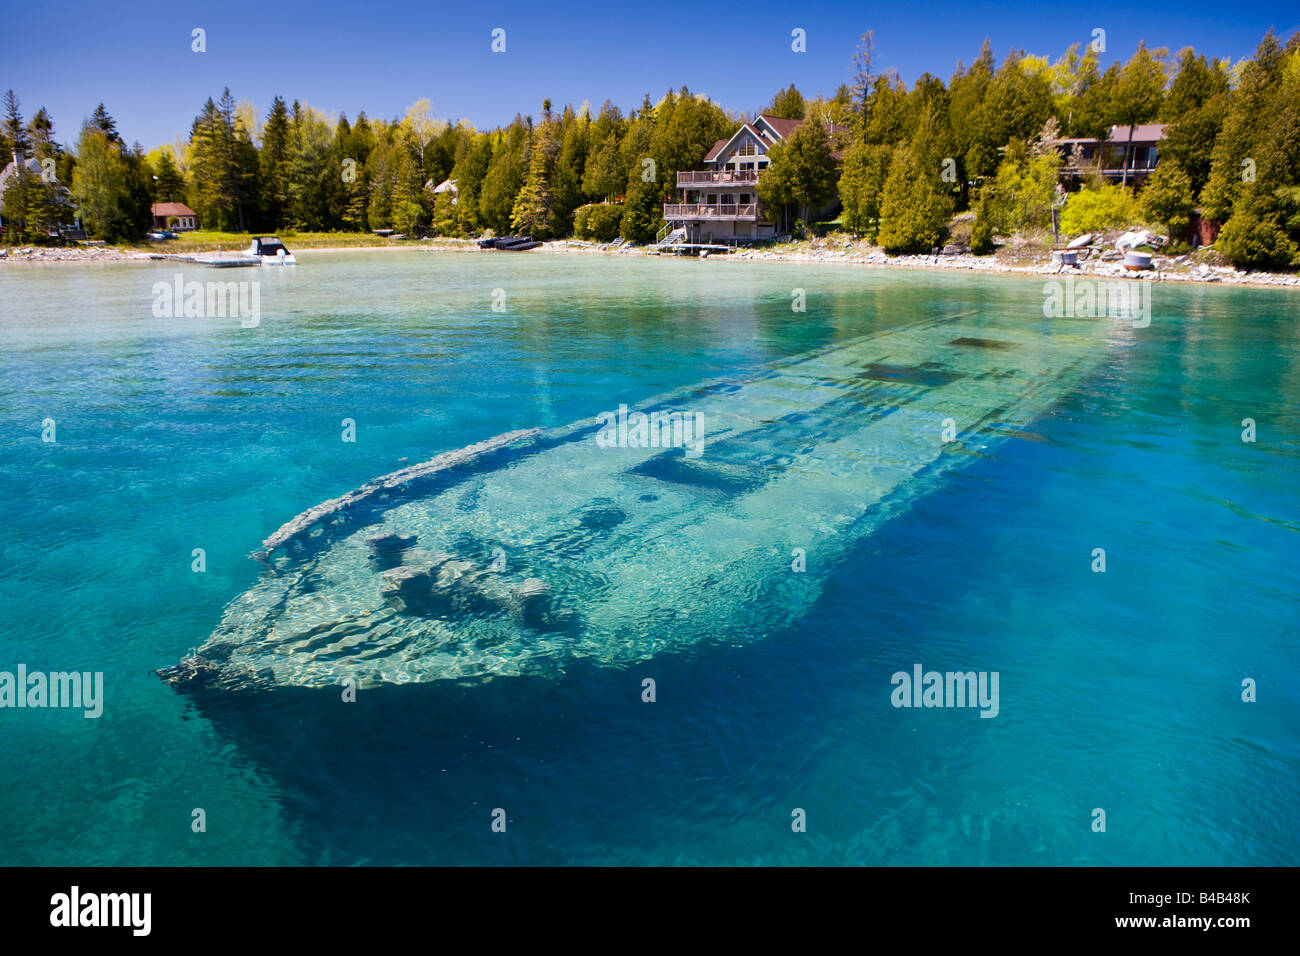 Shipwreck of the ship Sweepstakes (built in 1867) in Big Tub Harbour, Fathom Five National Marine Park, Lake Huron, Ontario. Stock Photo